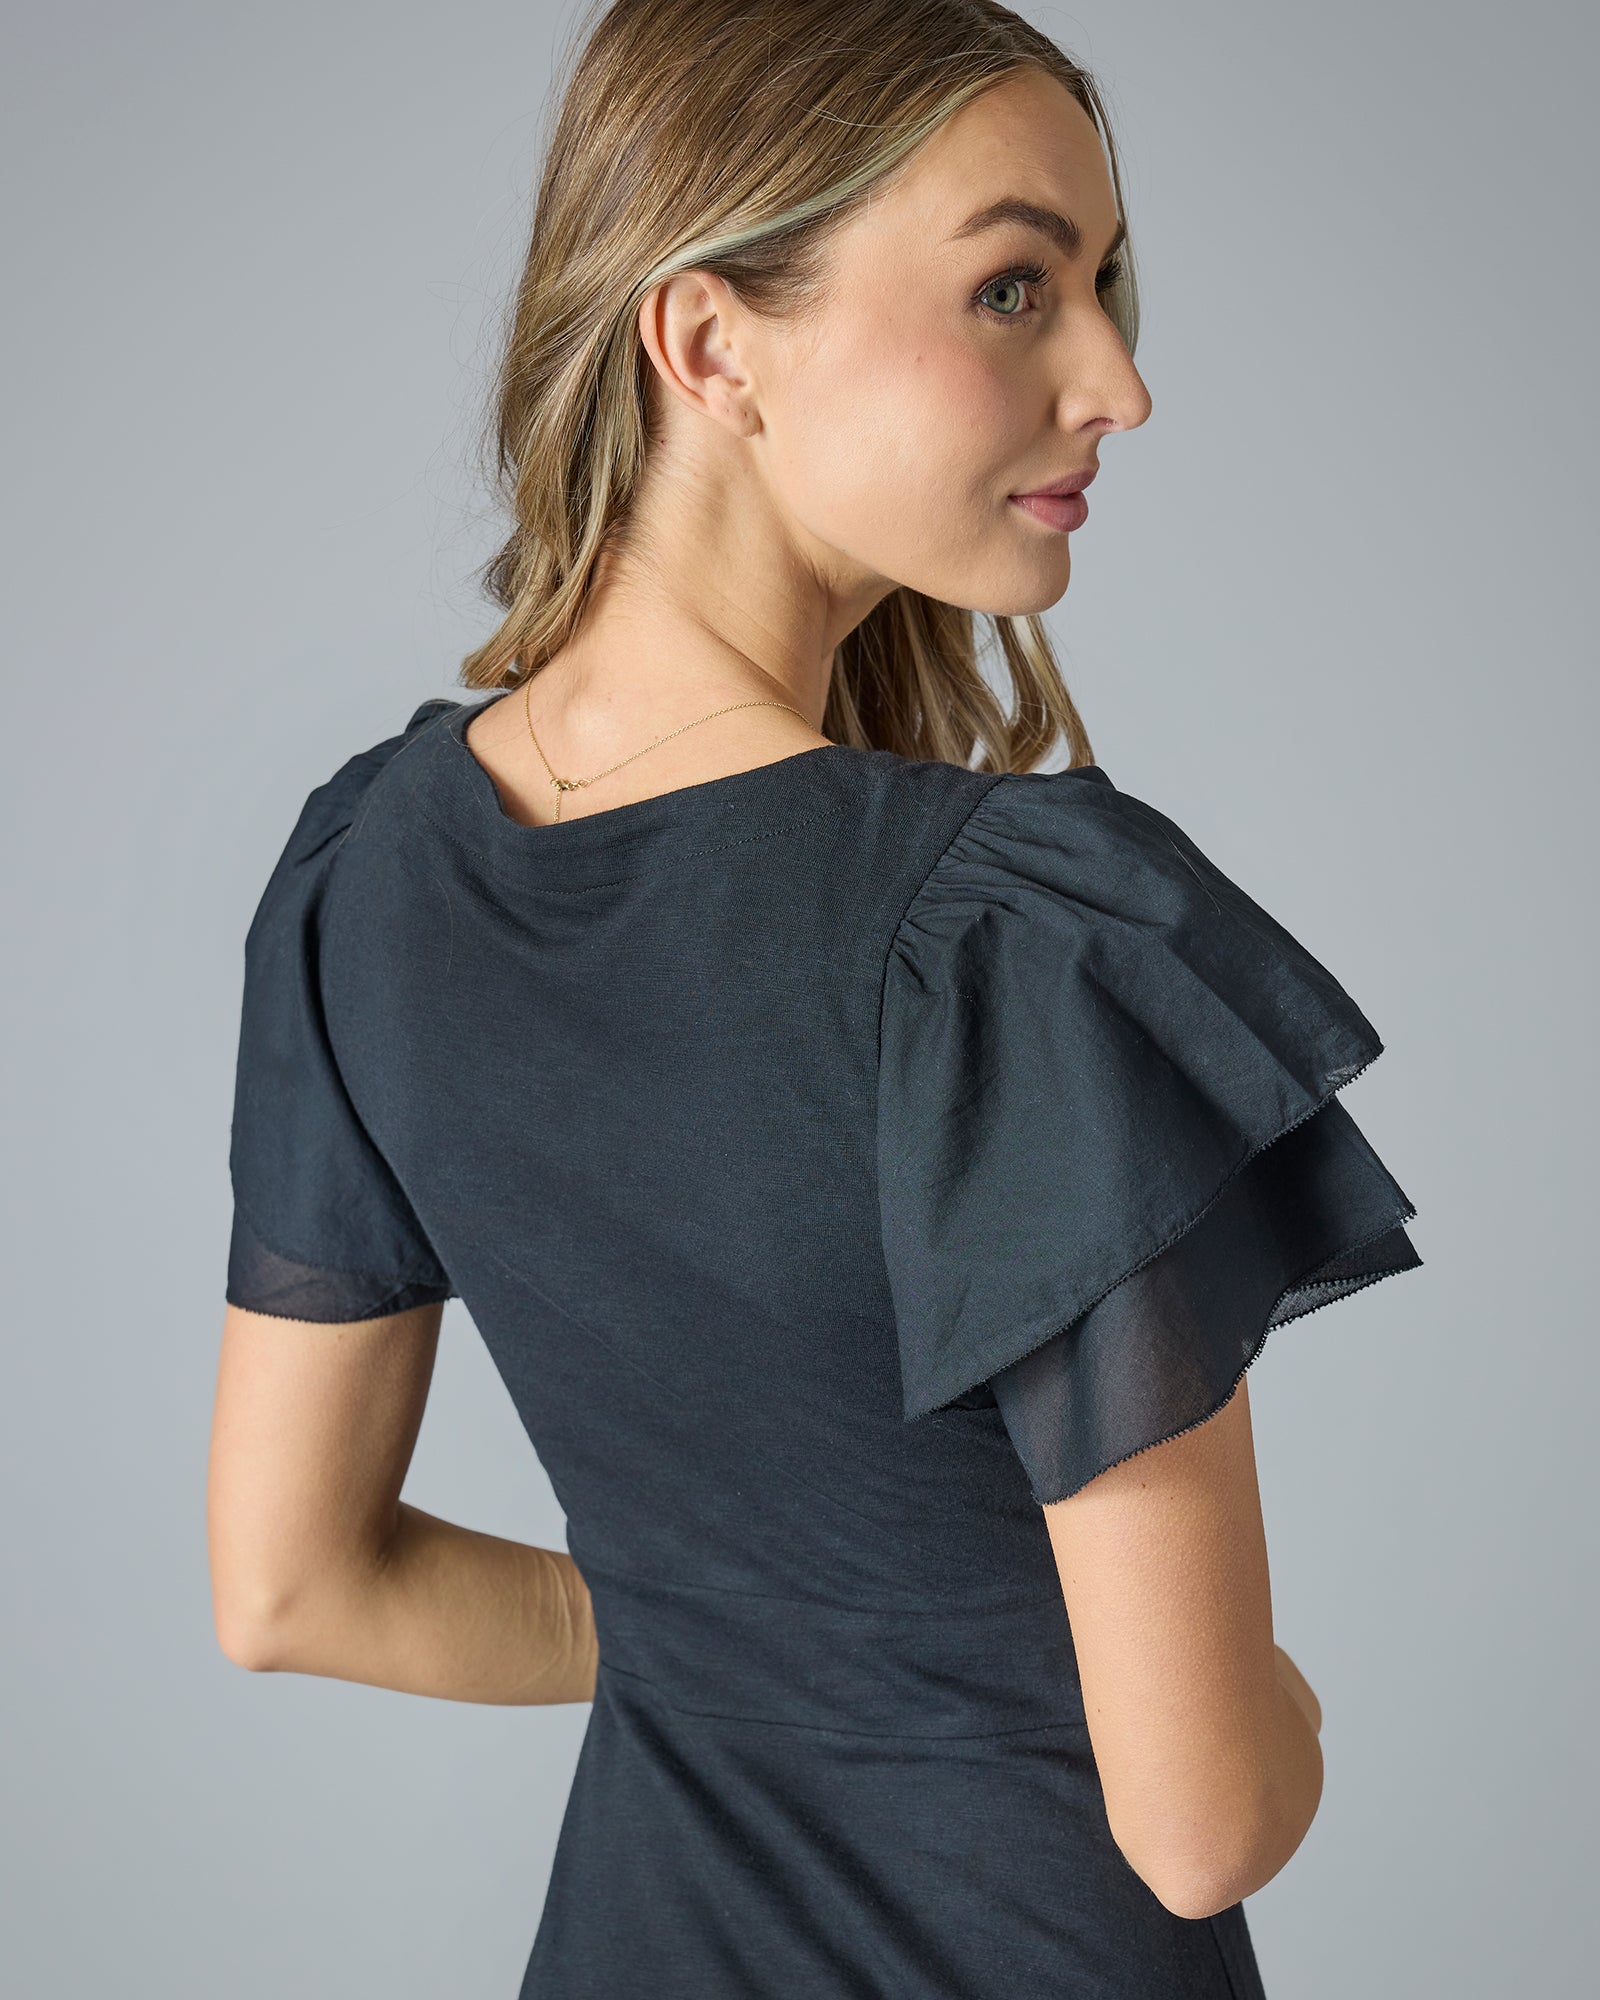 Woman in a black midi-length dress with ruffle short sleeves